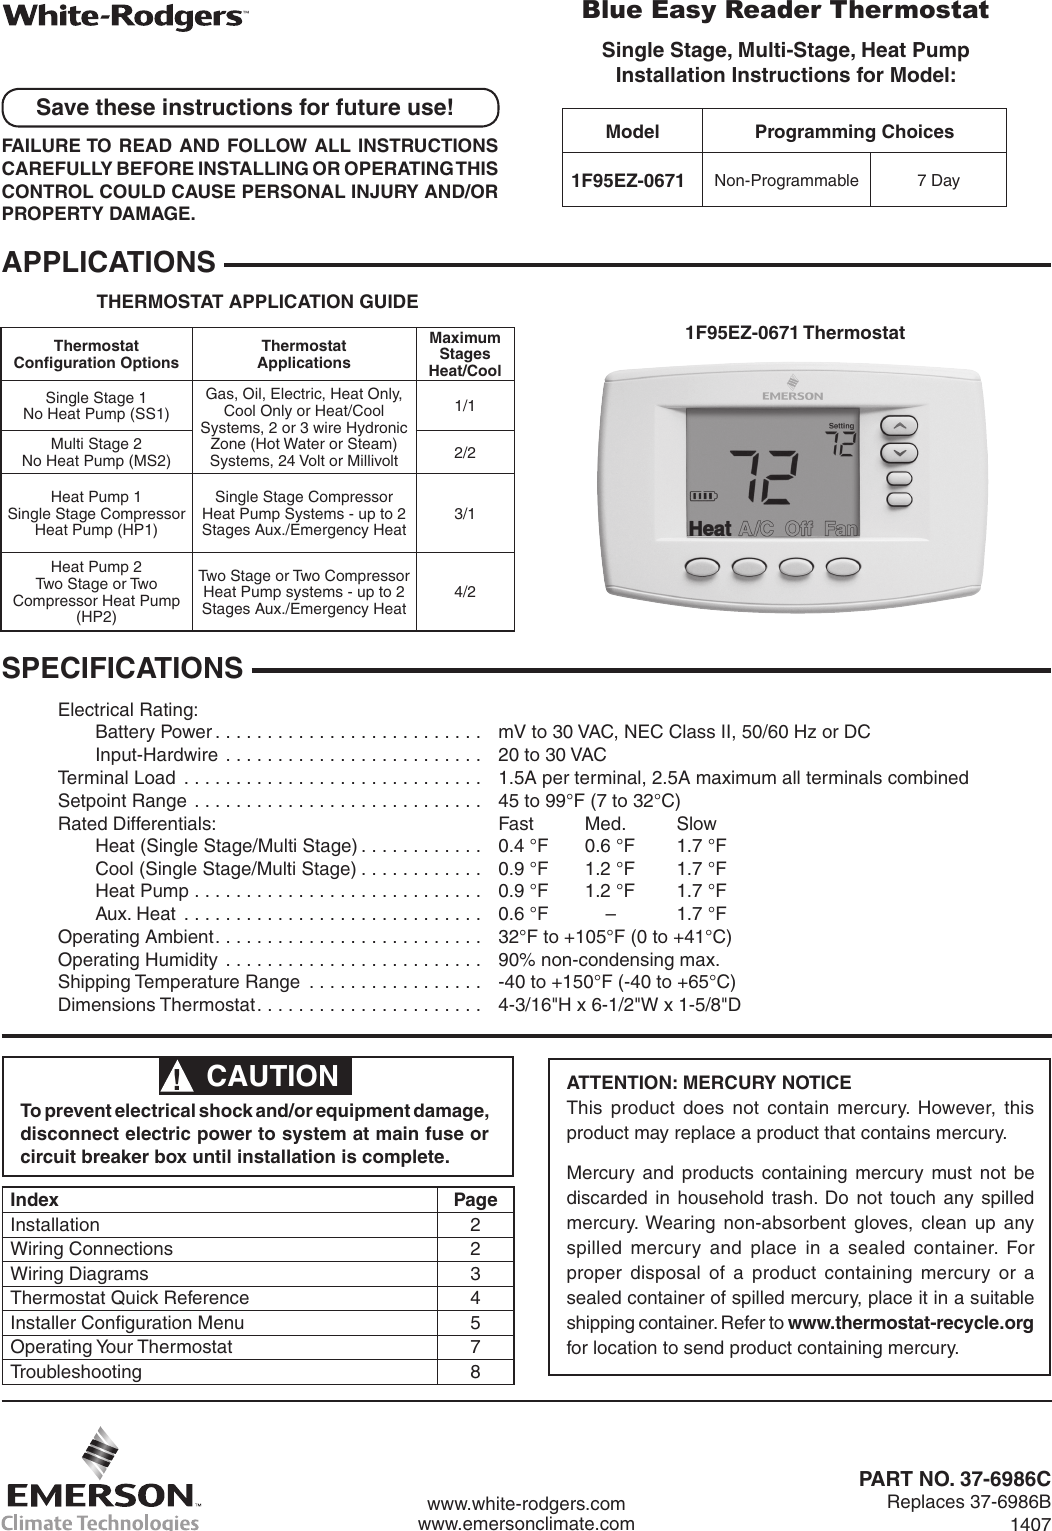 Page 1 of 8 - White-Rodgers White-Rodgers-1F95Ez-0671-Emerson-Blue-Easy-Reader-Thermostat-Installation-Instructions- 1F95EZ_0671_37-6986C  White-rodgers-1f95ez-0671-emerson-blue-easy-reader-thermostat-installation-instructions